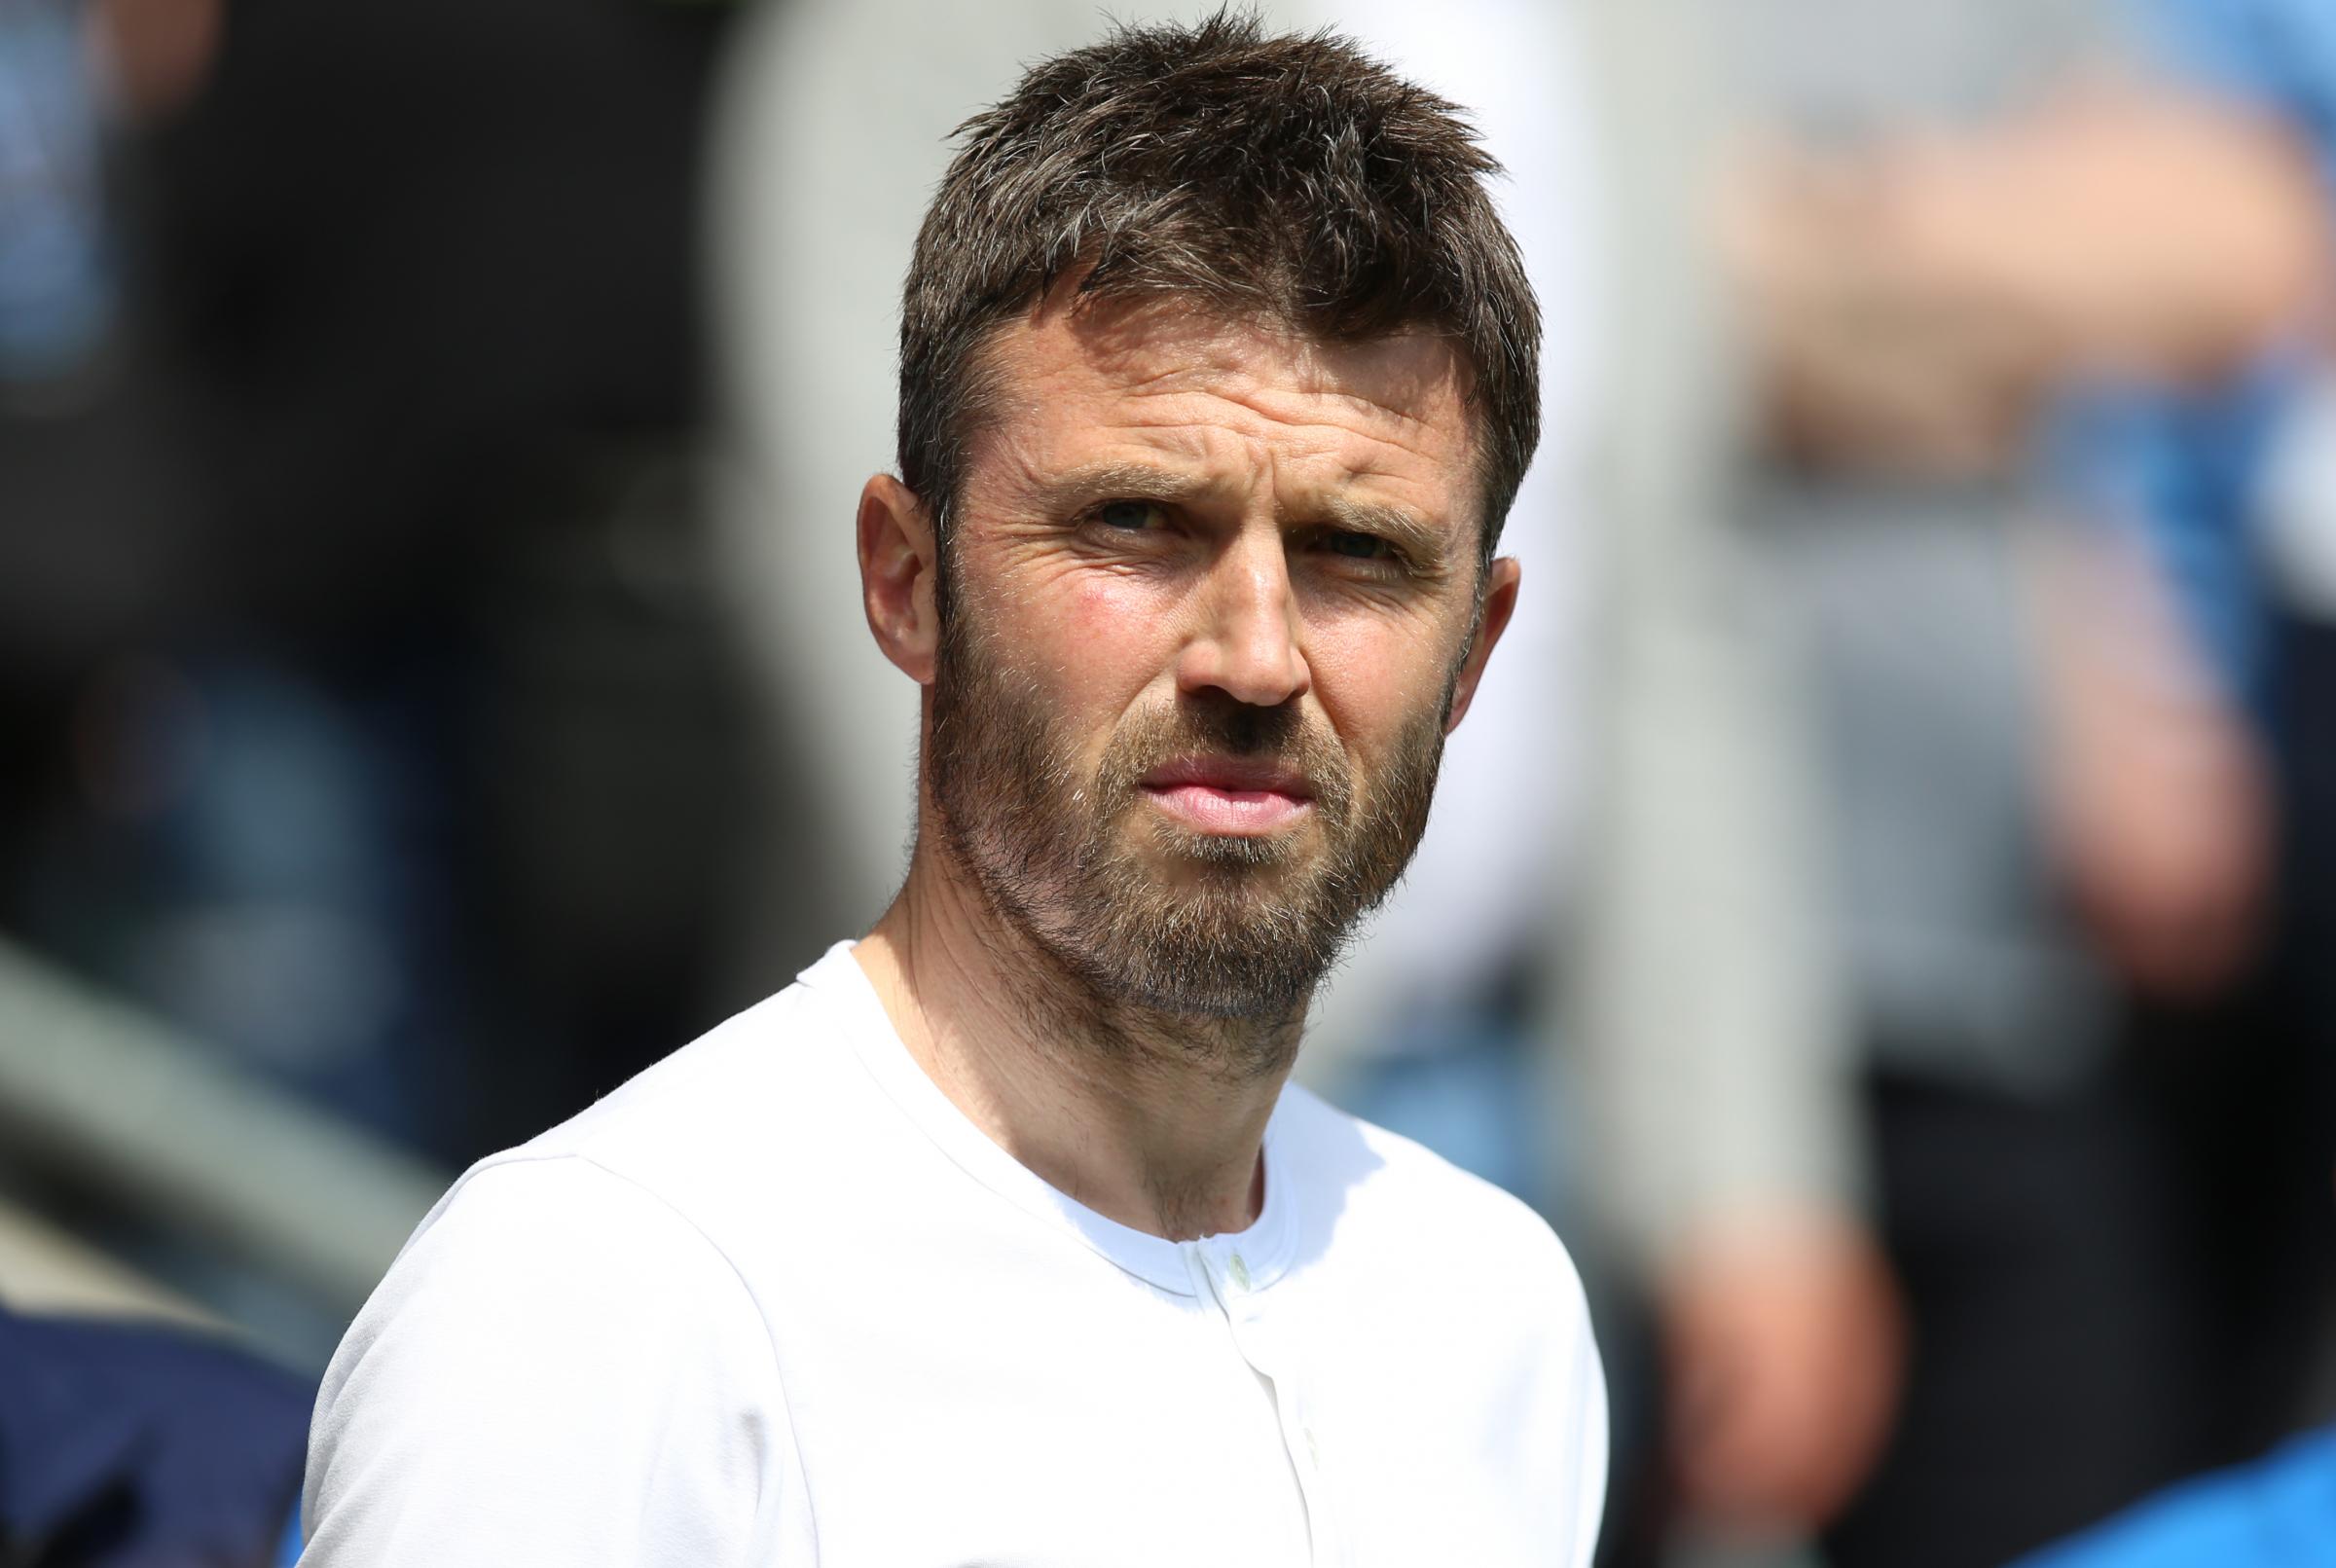 Middlesbrough's Michael Carrick responds to Tommy Conway transfer talk